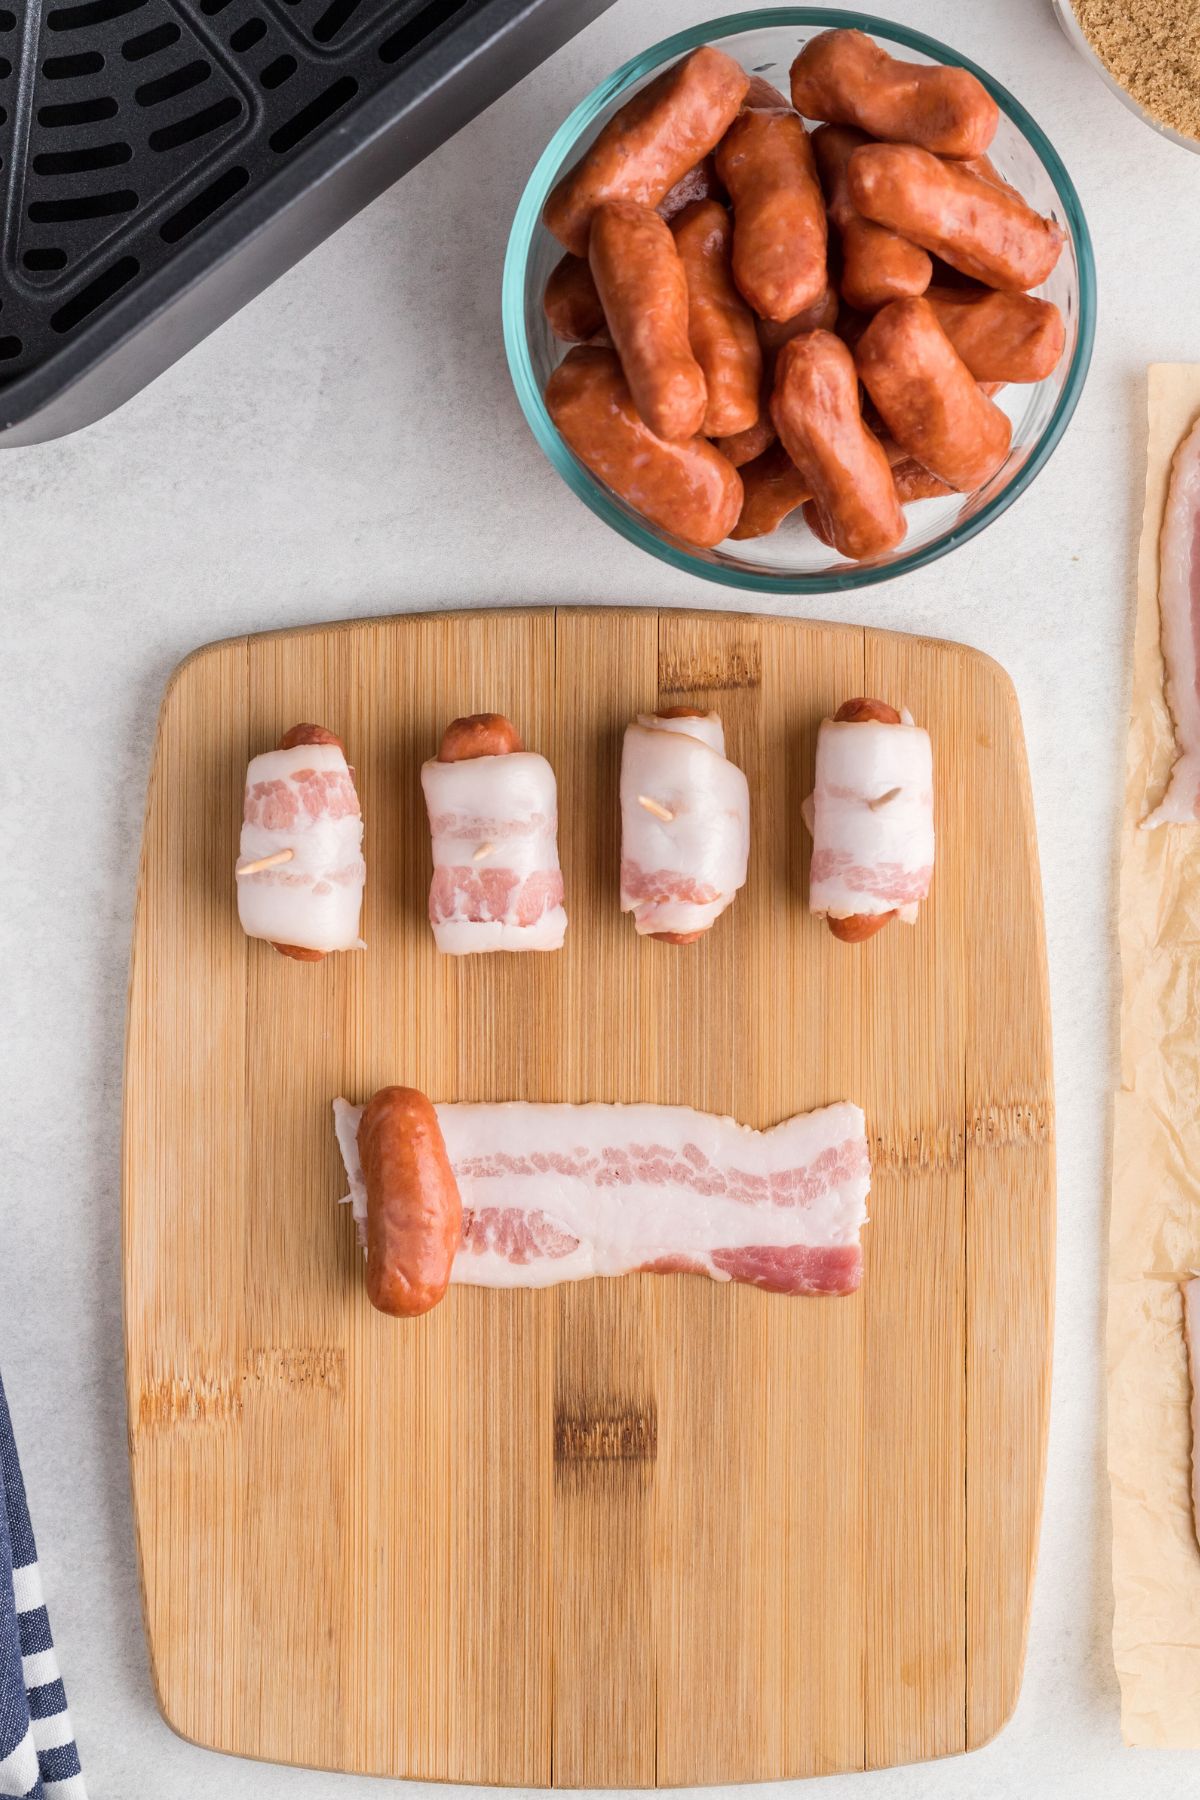 Bacon strips wrapped around smokies on a wooden cutting board